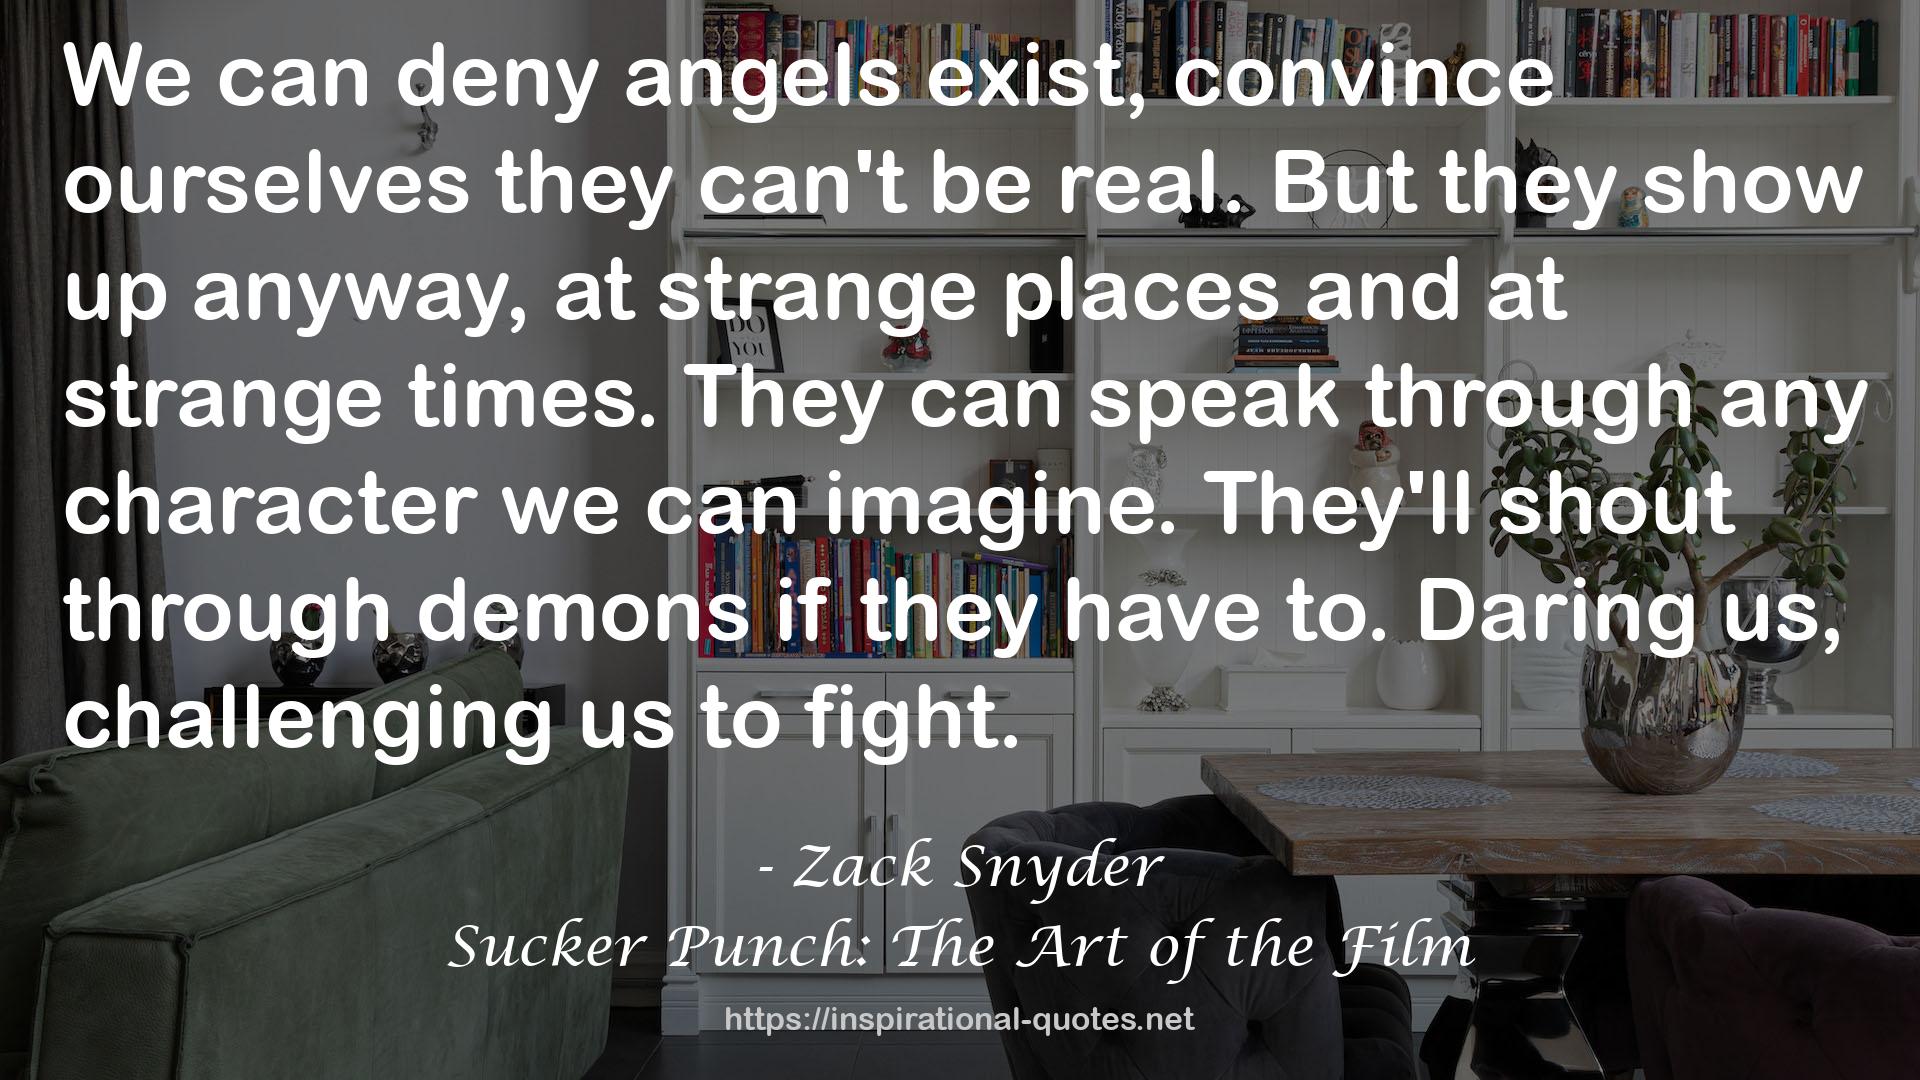 Sucker Punch: The Art of the Film QUOTES